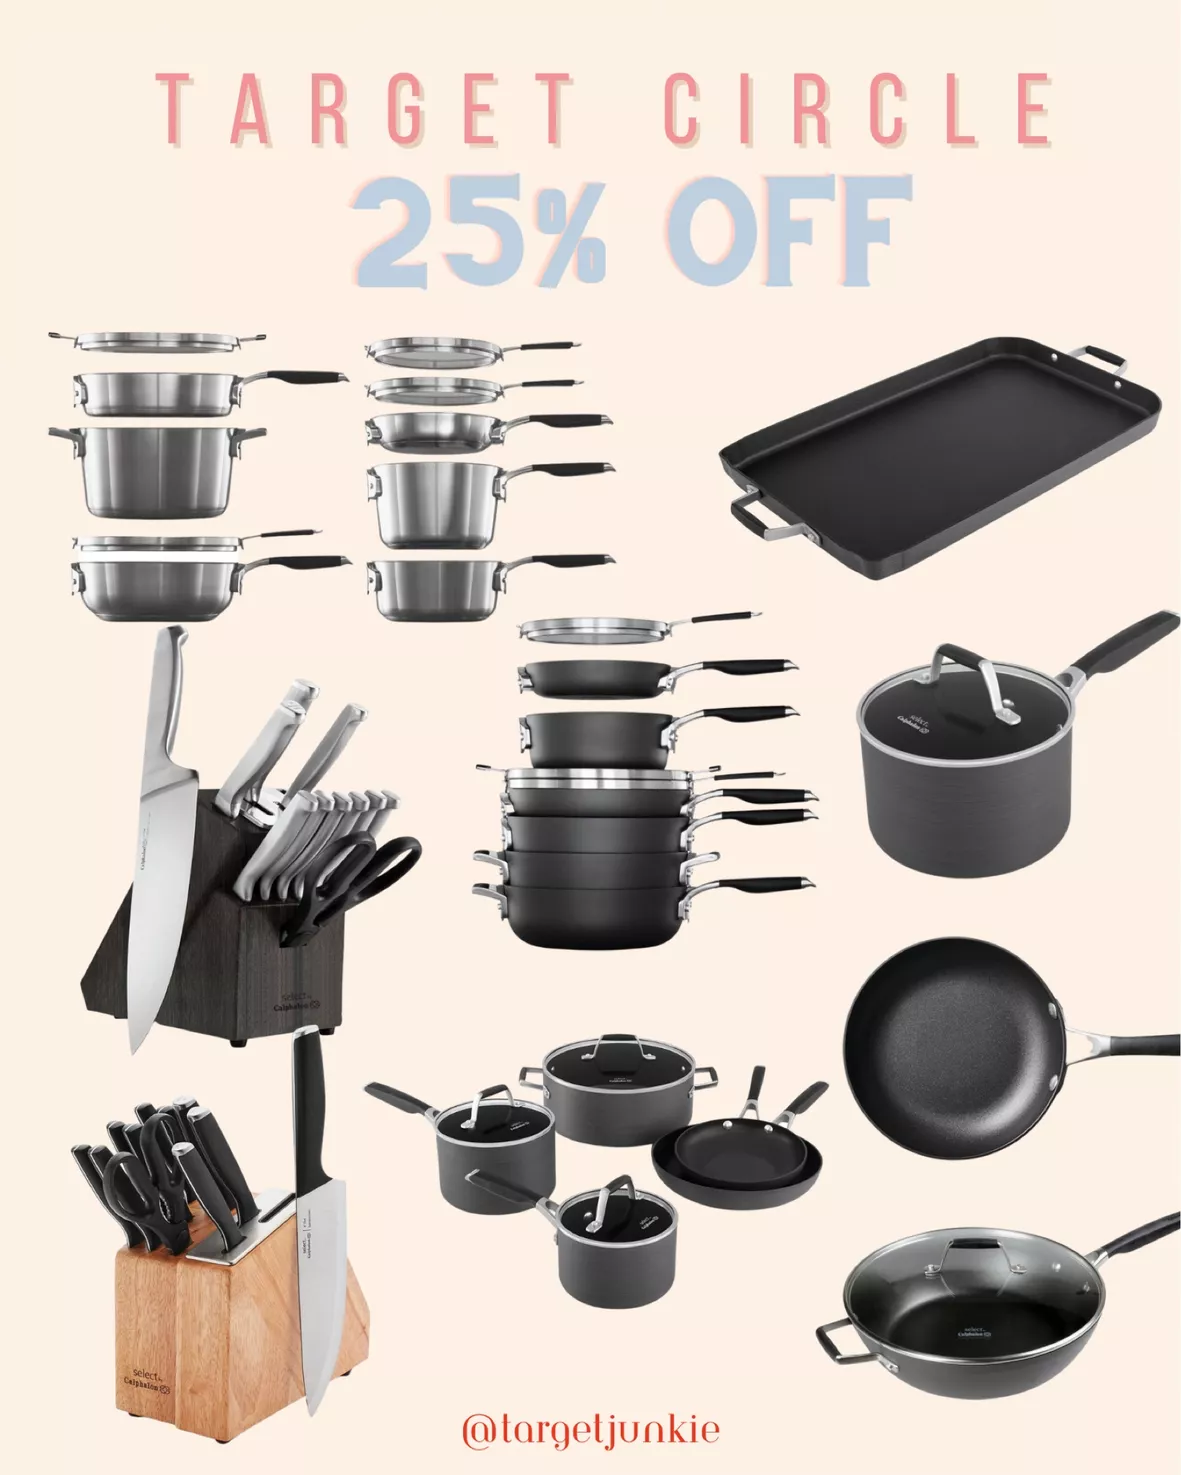 Select By Calphalon With Aquashield Nonstick 8pc Cookware Set : Target